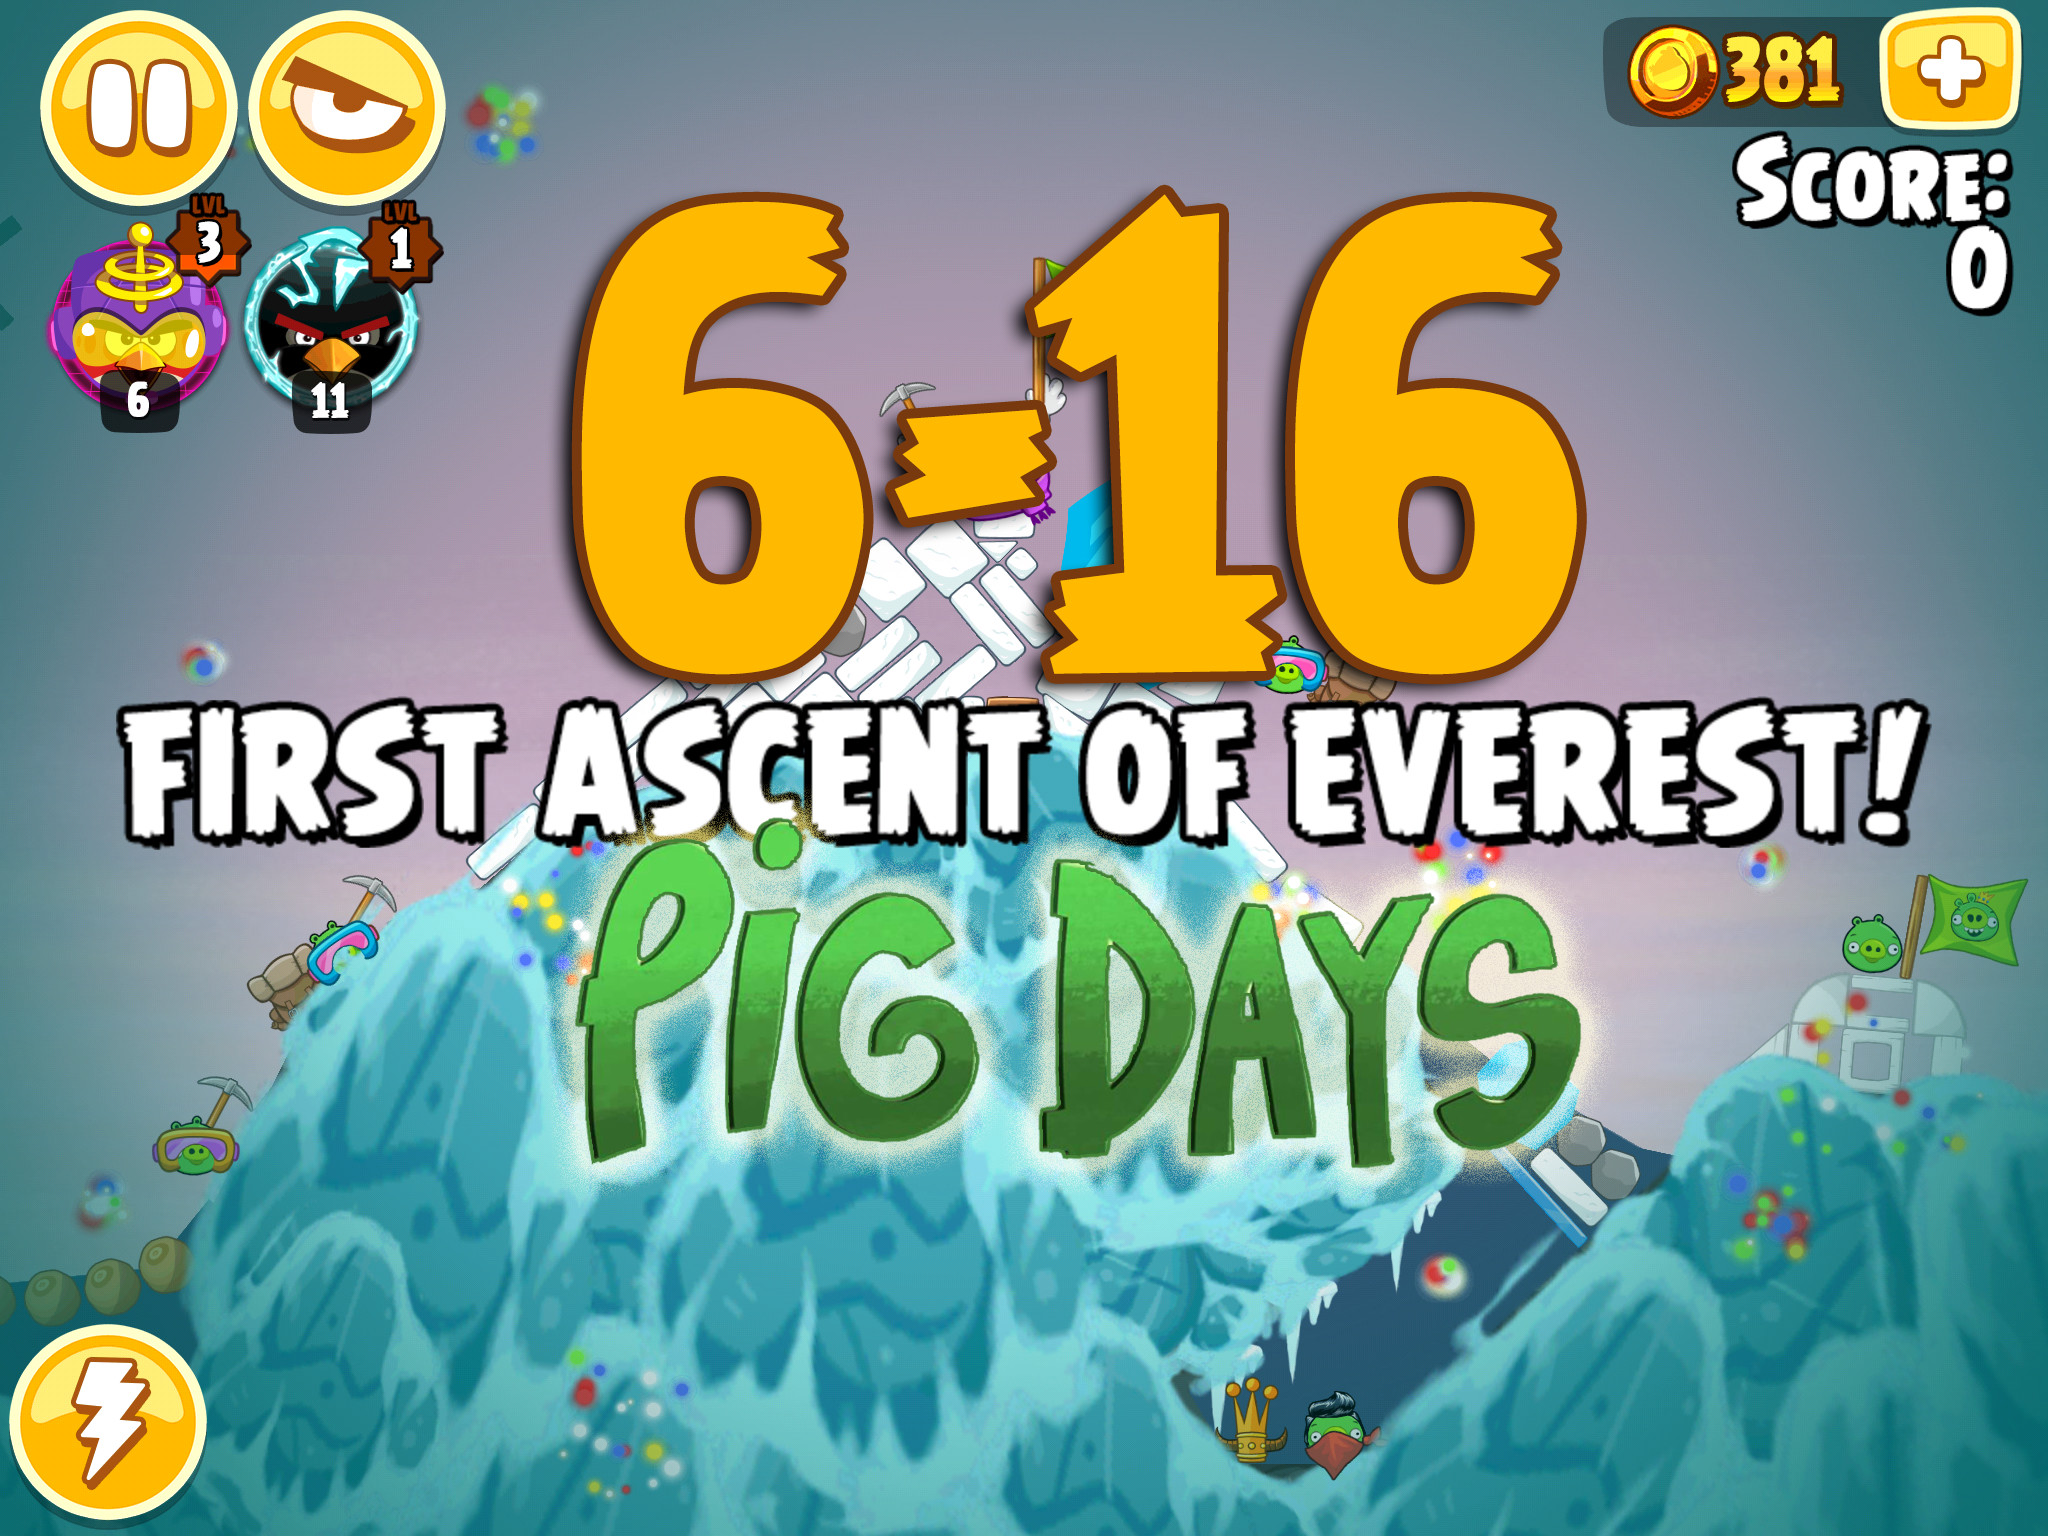 Angry Birds Seasons The Pig Days Level 6-16